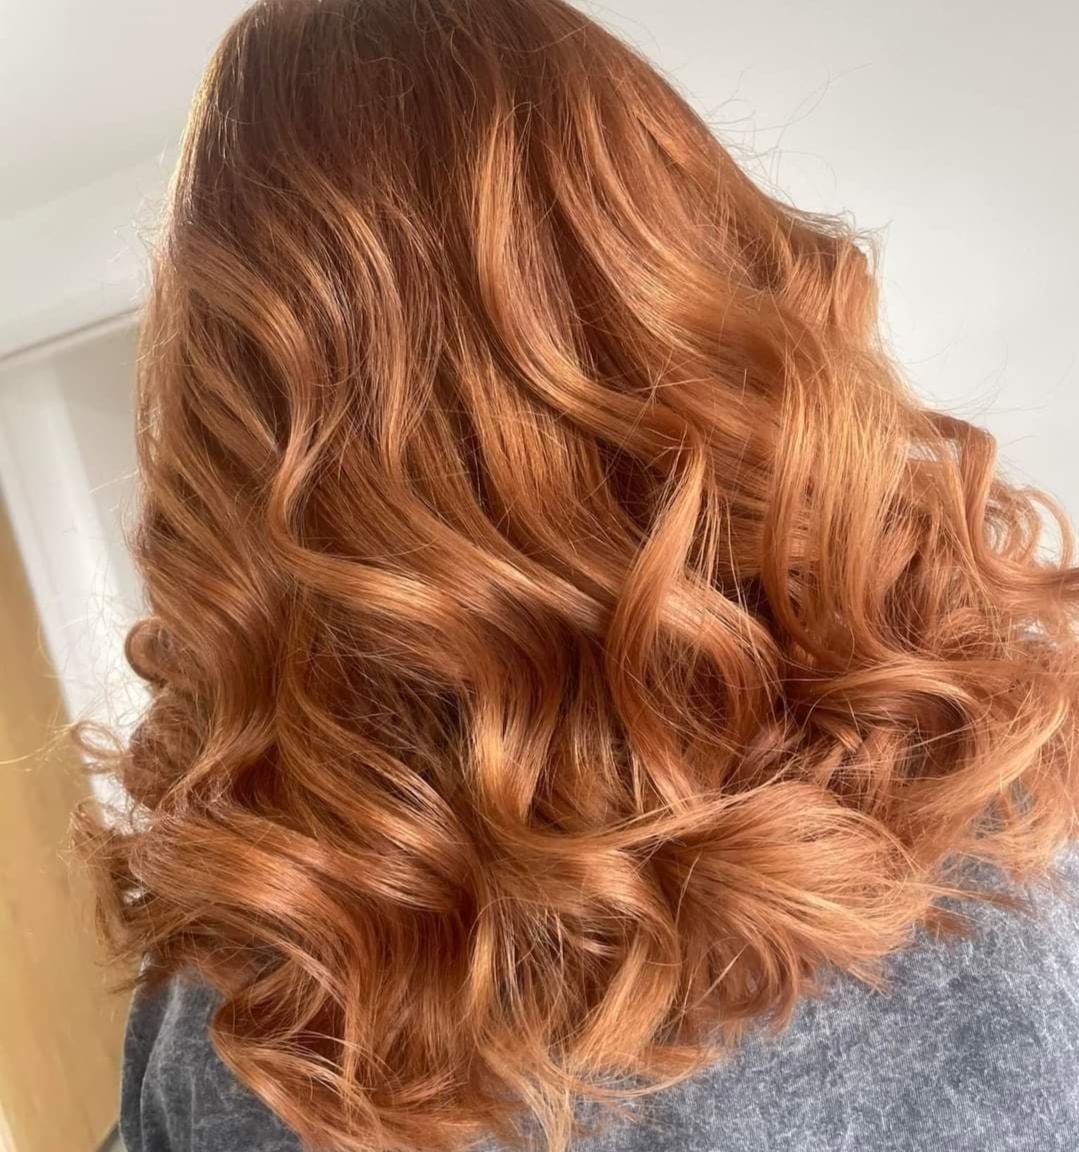 Classic waves and amazing color